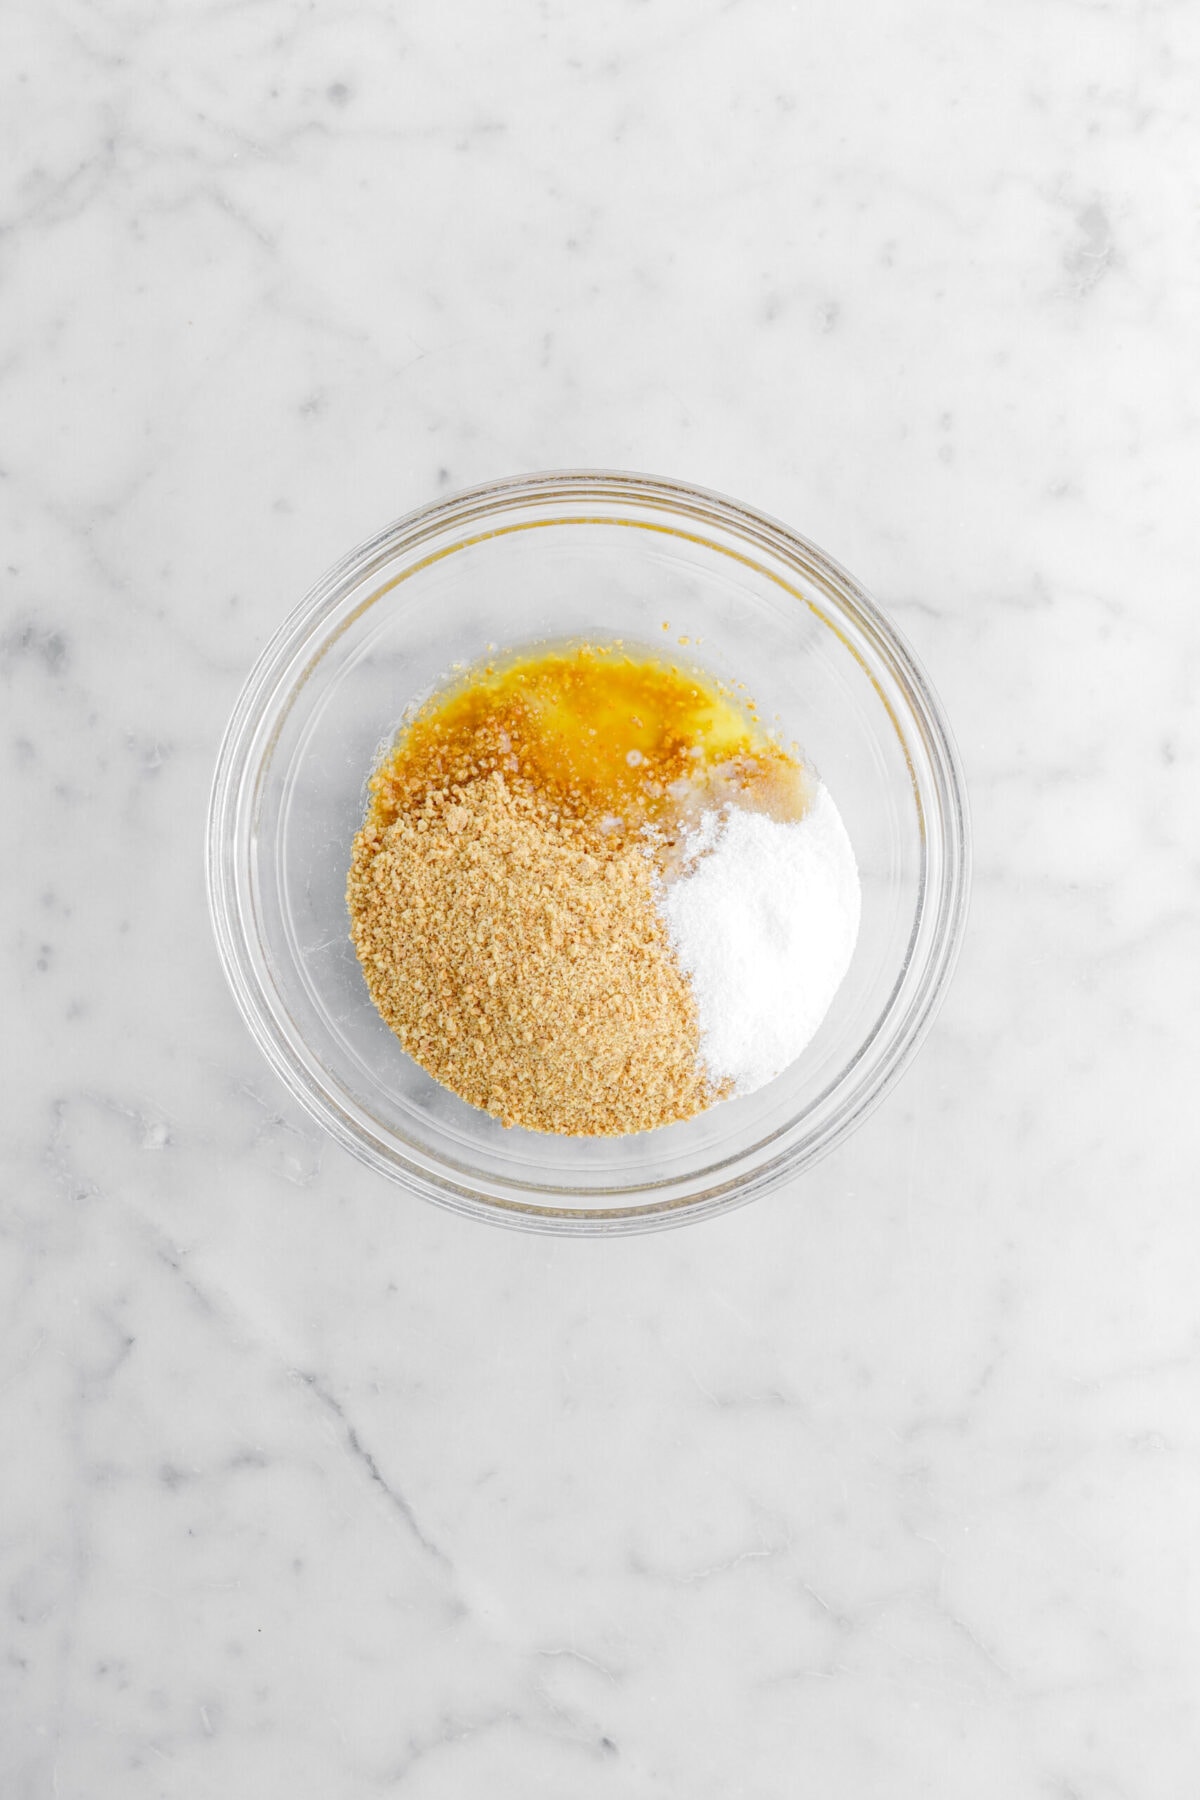 graham cracker crumbs, sugar, and melted butter in glass bowl.